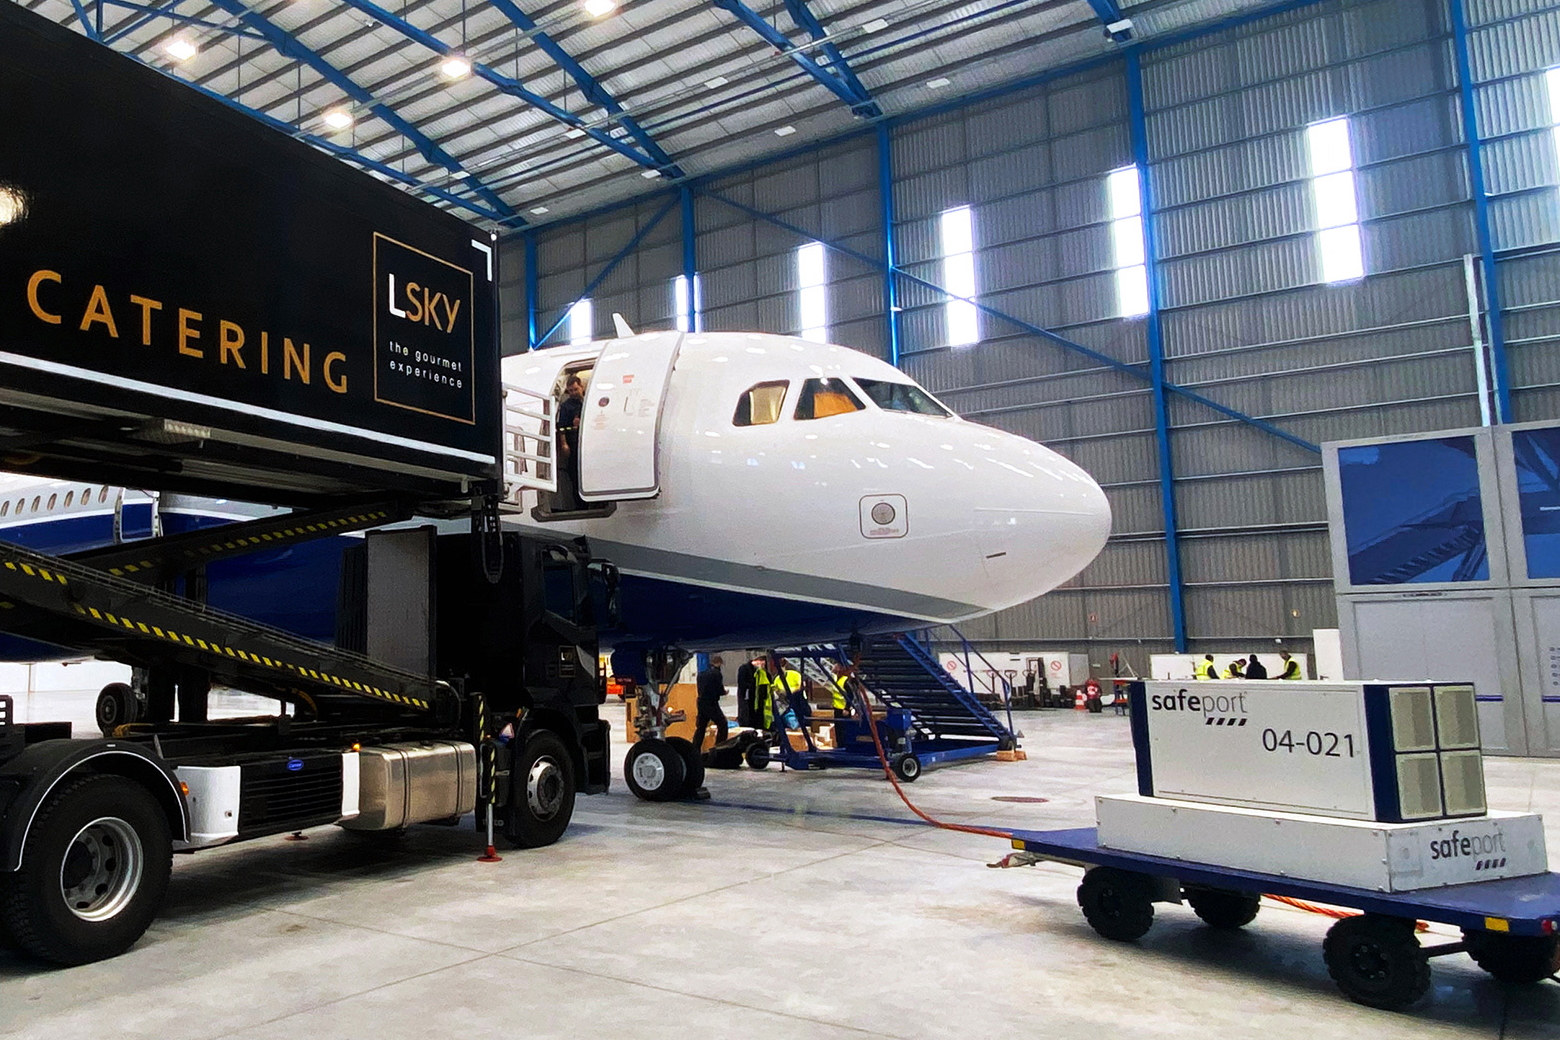 Mesa, the engineering and maintenance company of the Hi Fly group, has officially opened a new hangar at Beja Airport (BYJ) in Portugal. Click to enlarge.